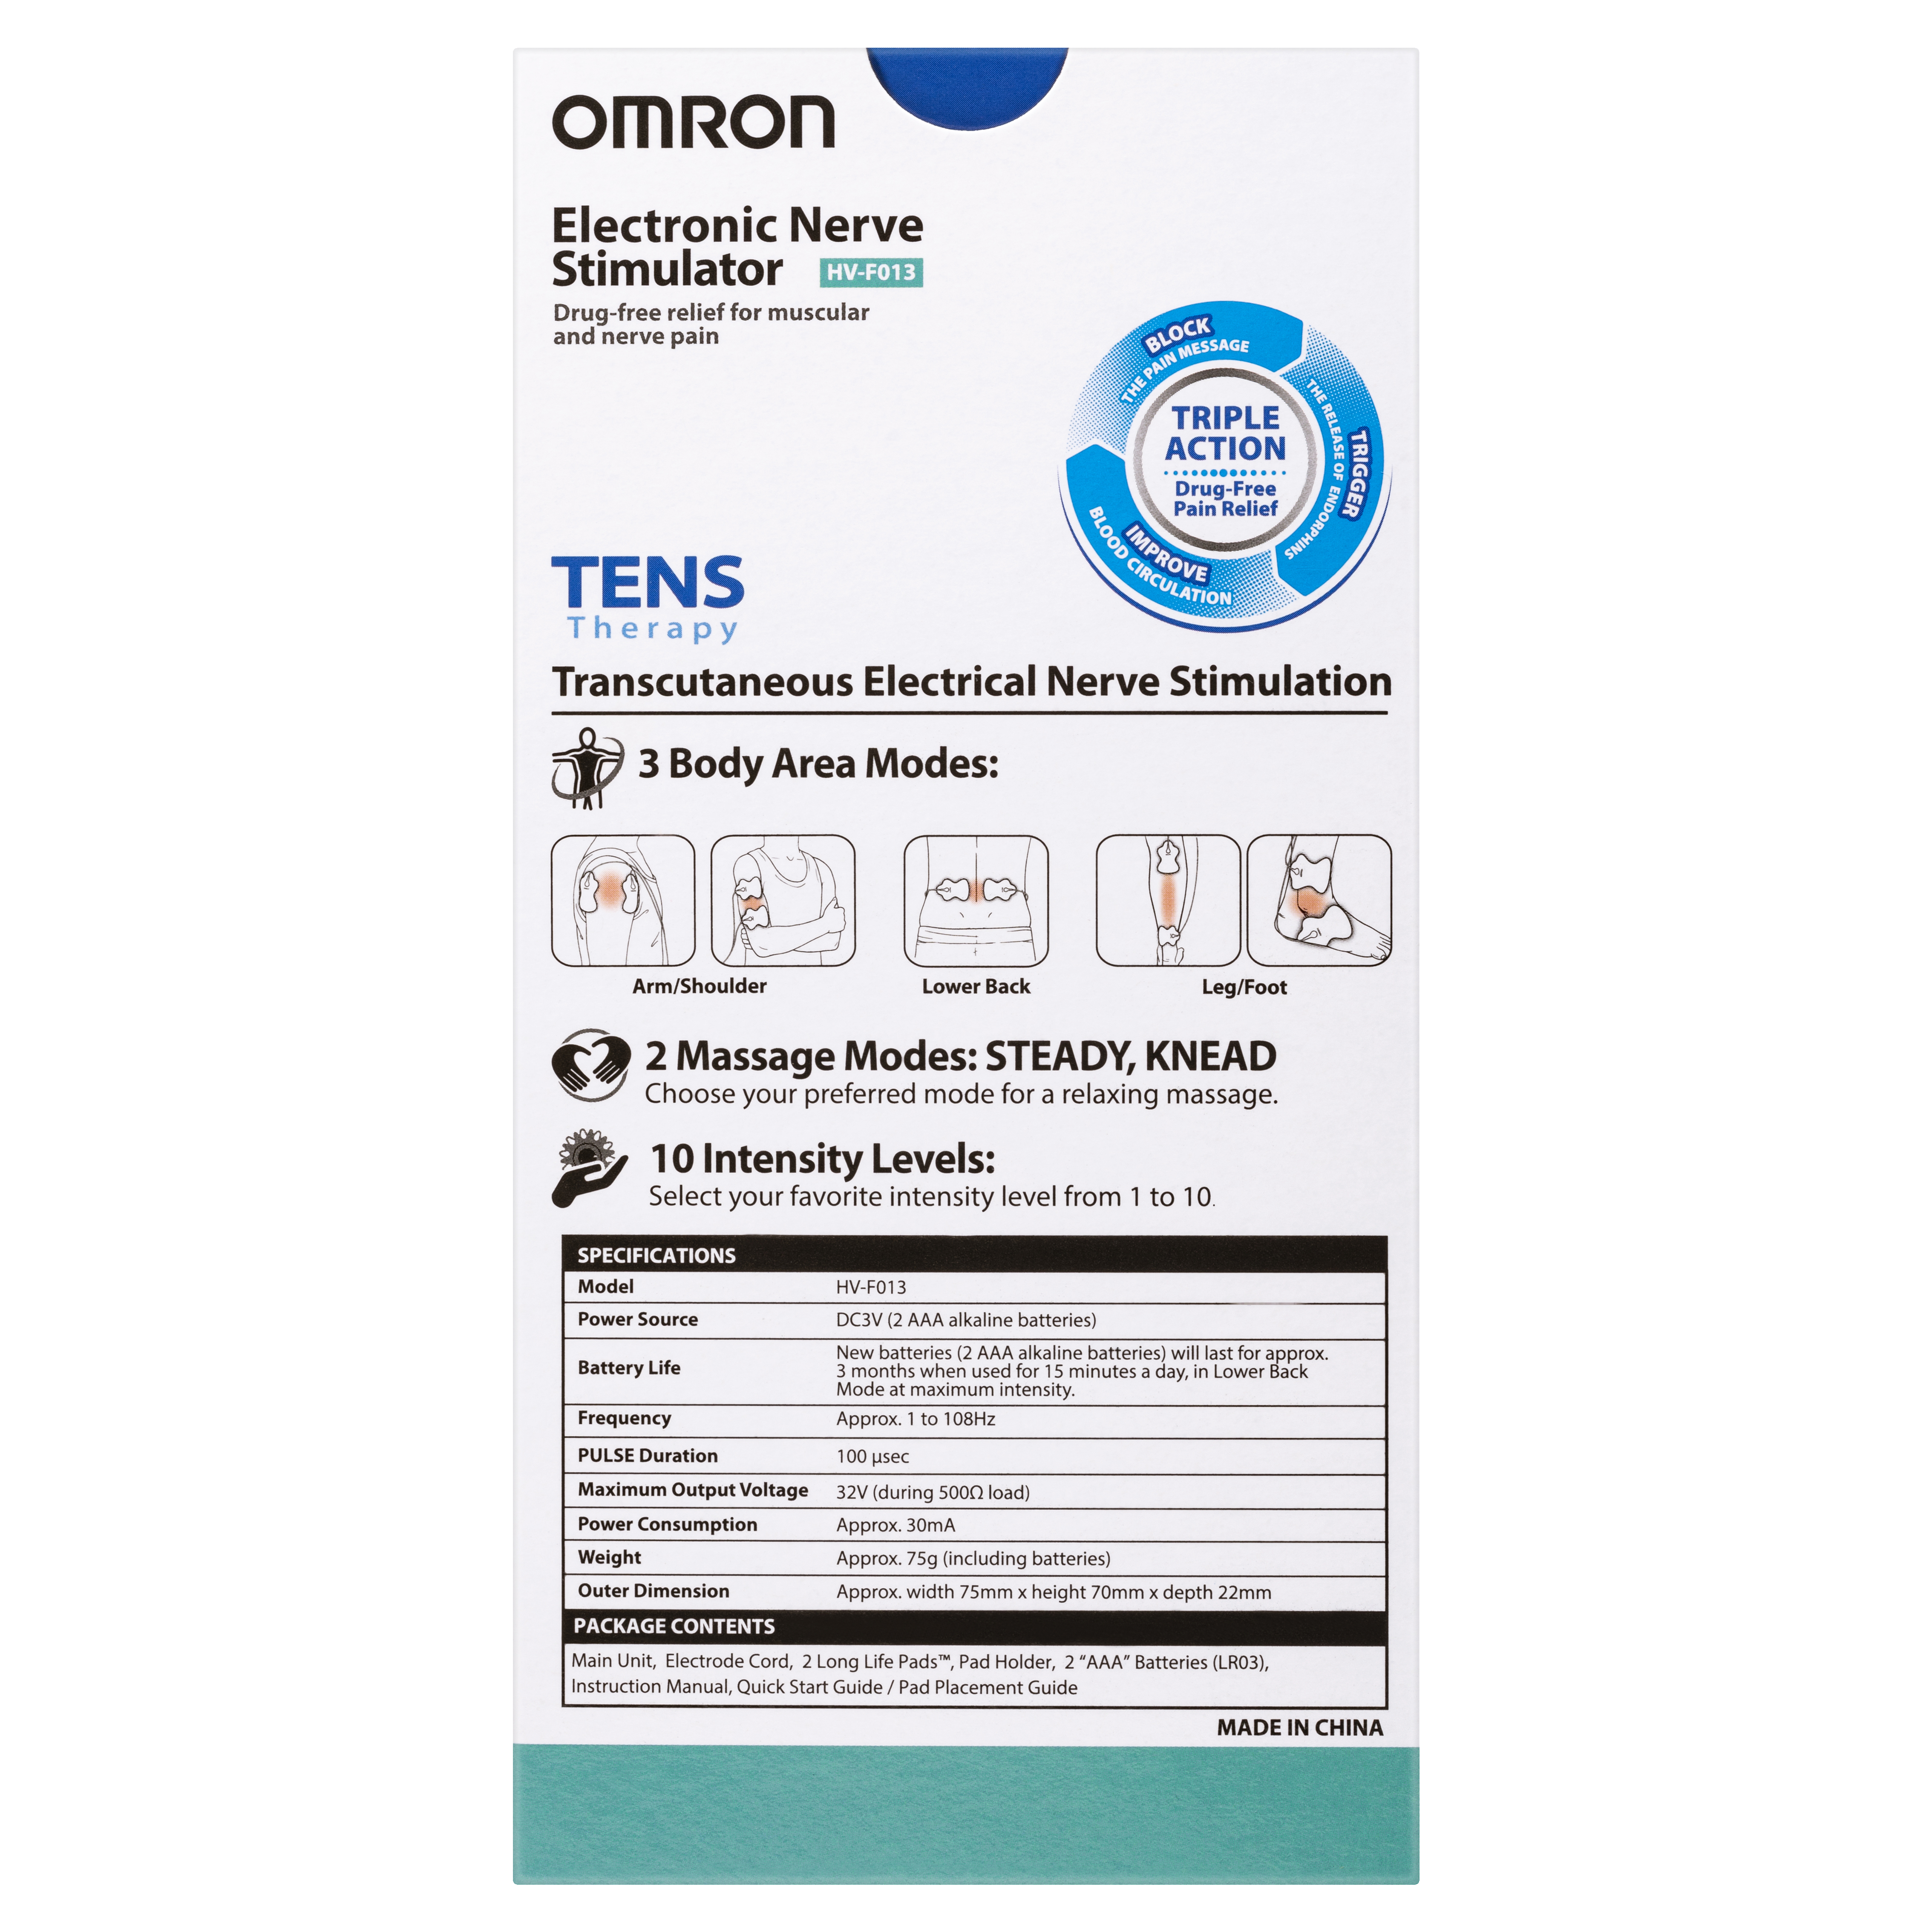 https://smartwellness.com.au/wp-content/uploads/2022/11/Omron-HVF013-TENS-Therapy-Device-In-Packaging-2D-Back.png